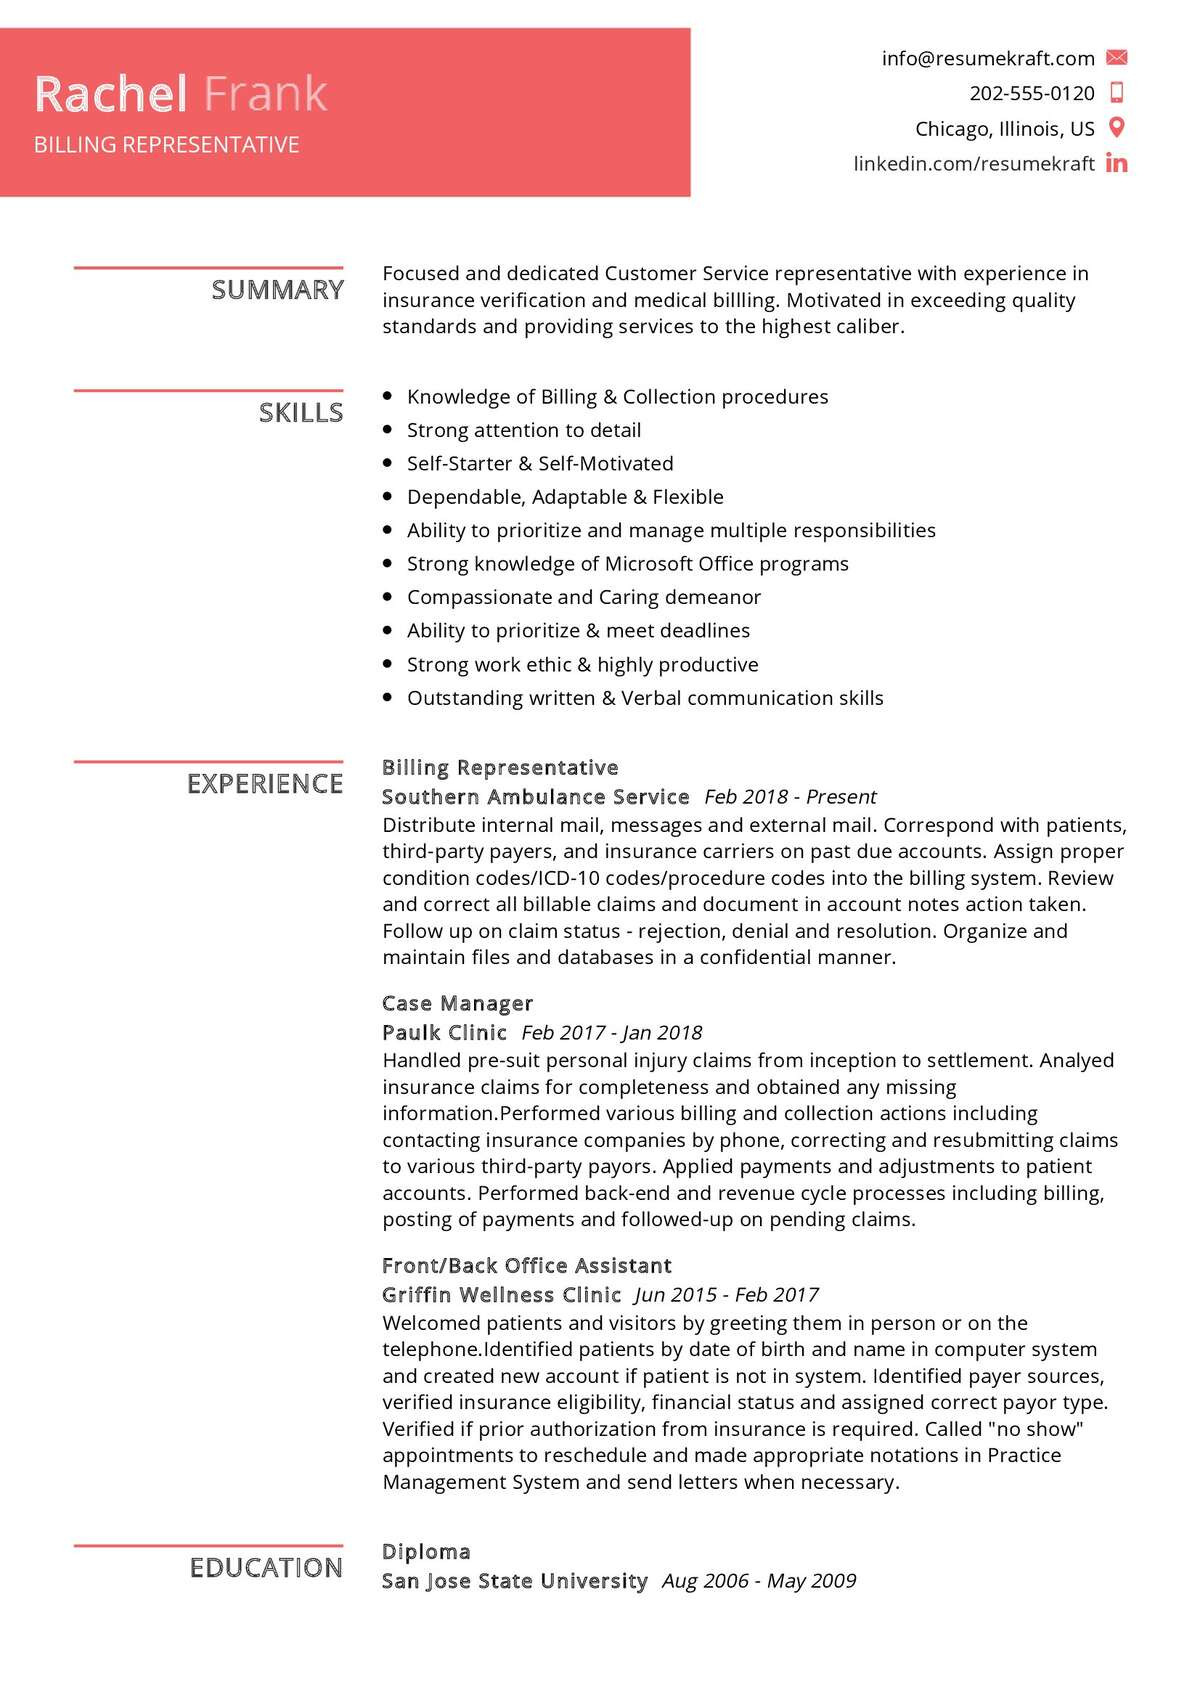 Sample Resume for Patient Service Representative Billing Representative Resume Sample 2021 Writing Guide & Tips …